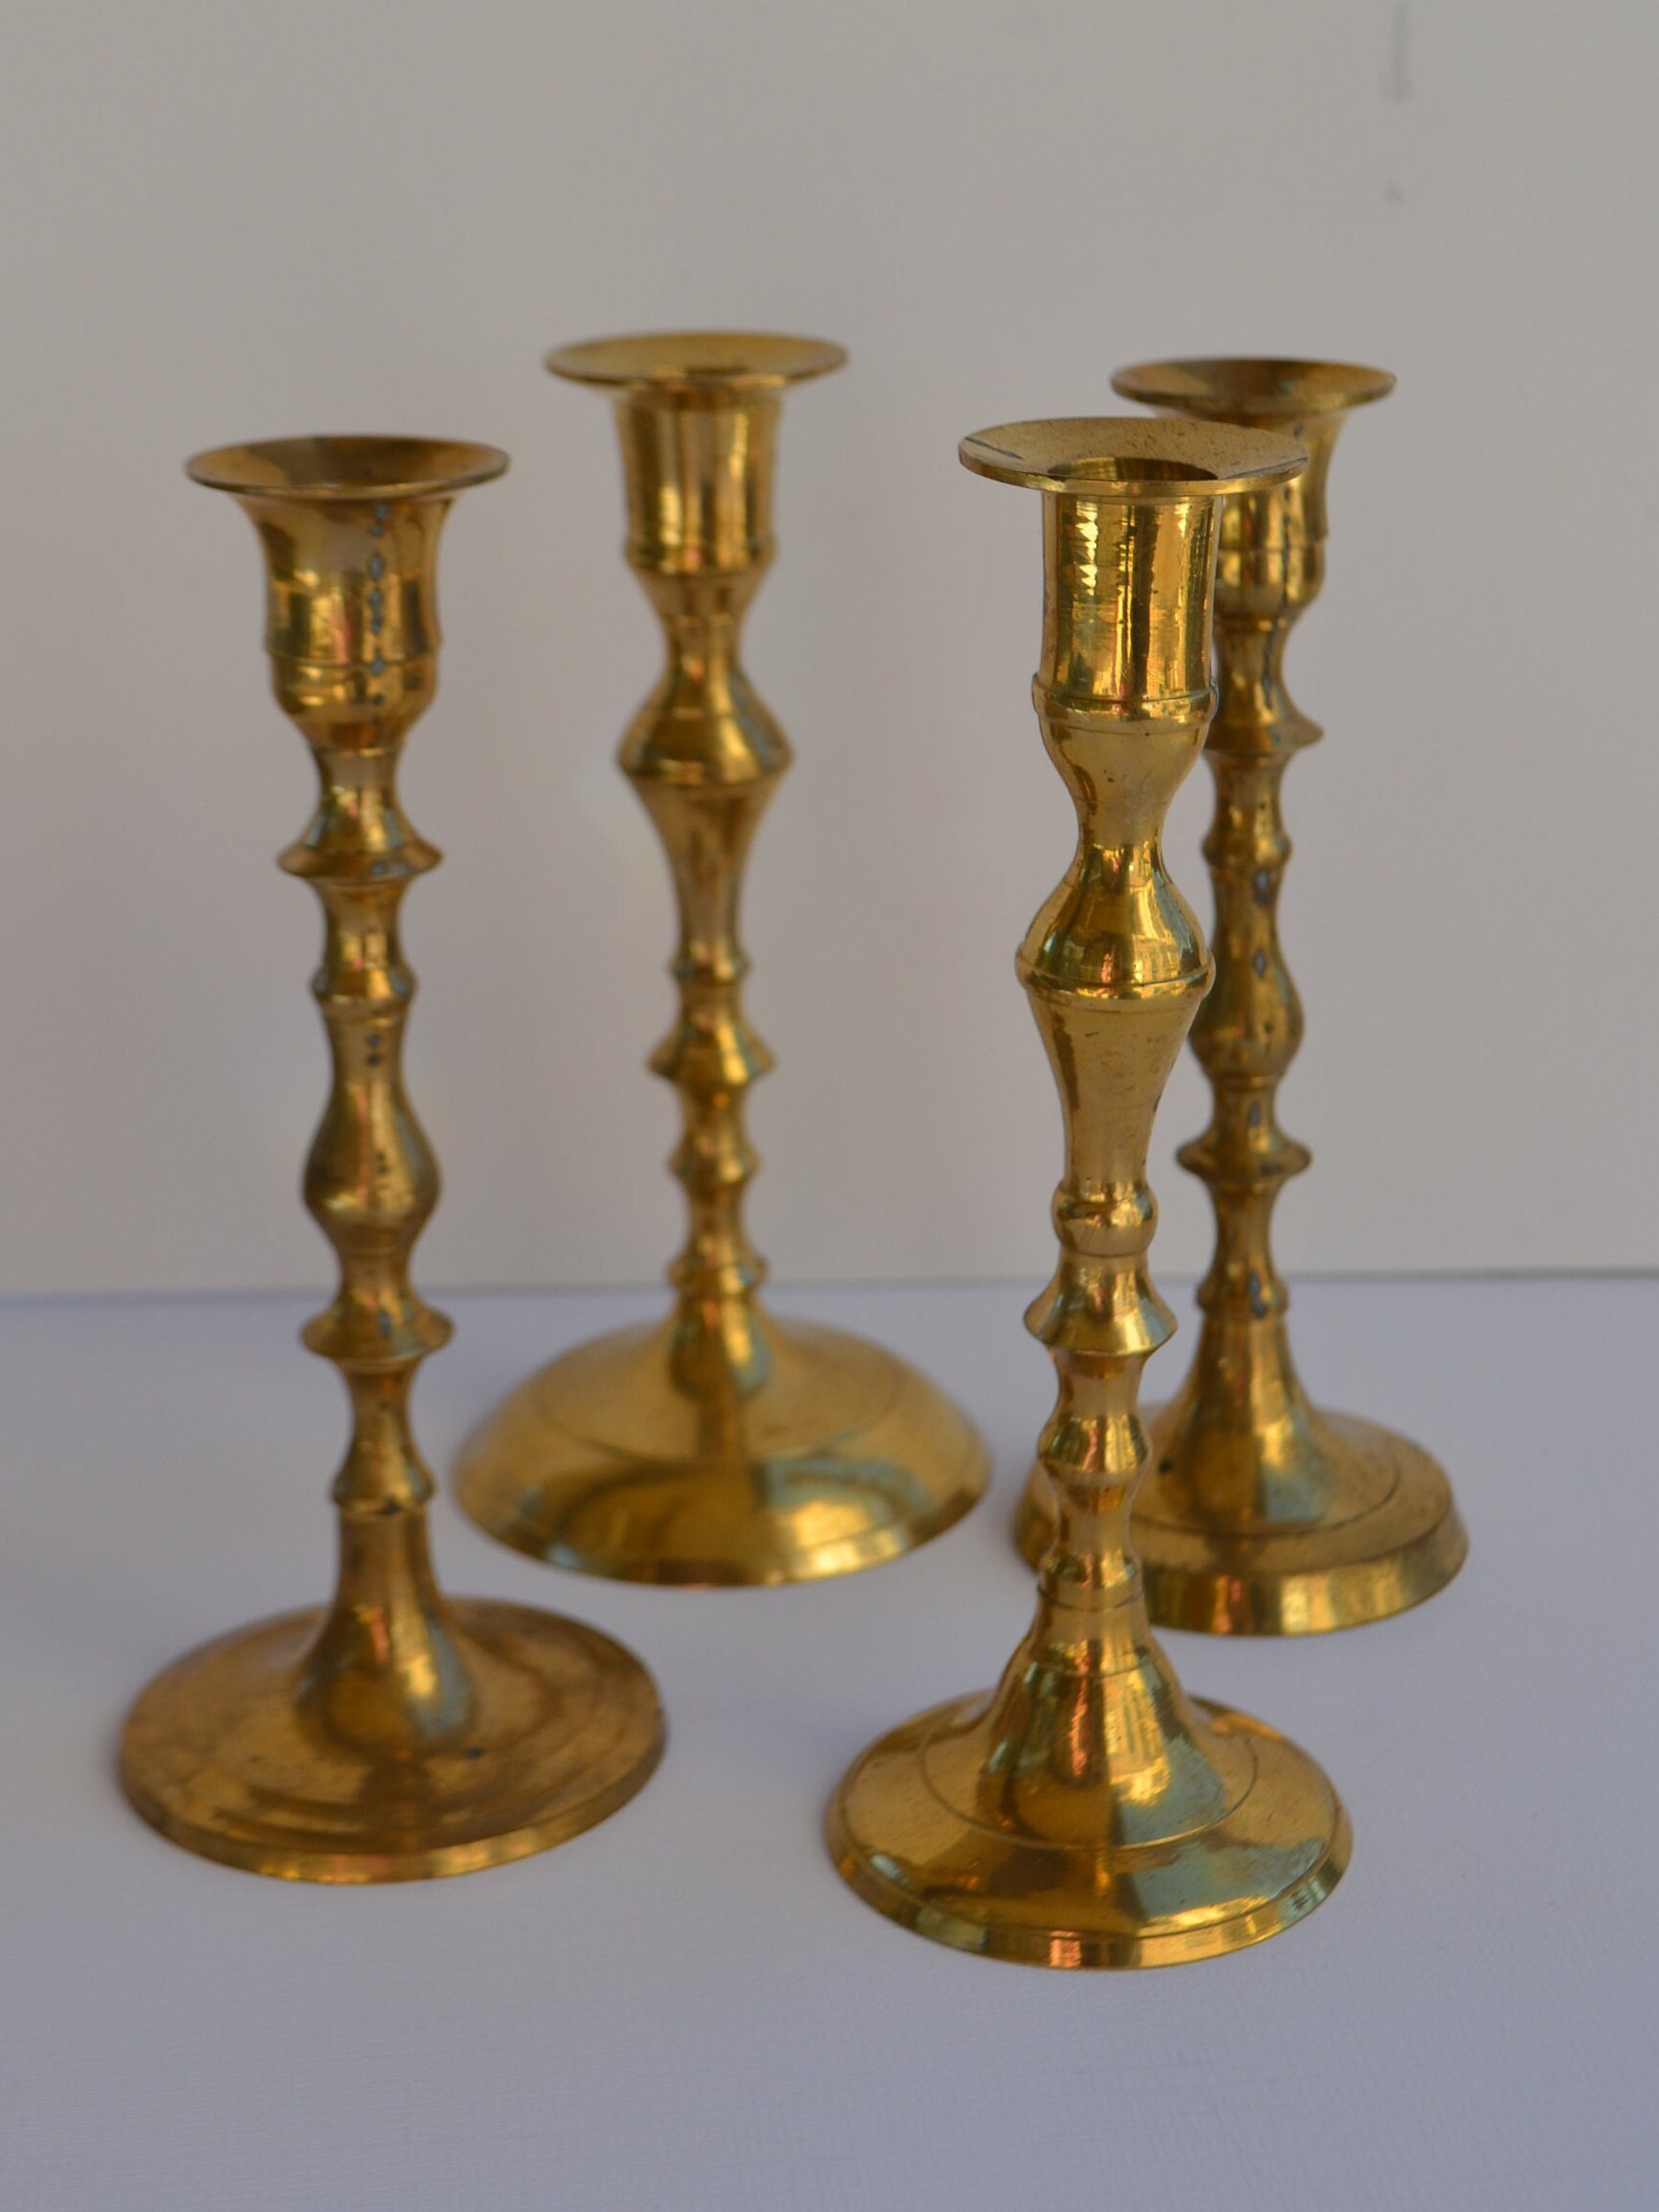  Uiifan 4 Pcs Vintage Candlestick Holders Brass Candlestick  Holders Vintage Candle Holder Fits Tapered Candlesticks with Saucer and  Handle for Wedding Baptism First Communion Home Window Decor(Gold) : Home &  Kitchen